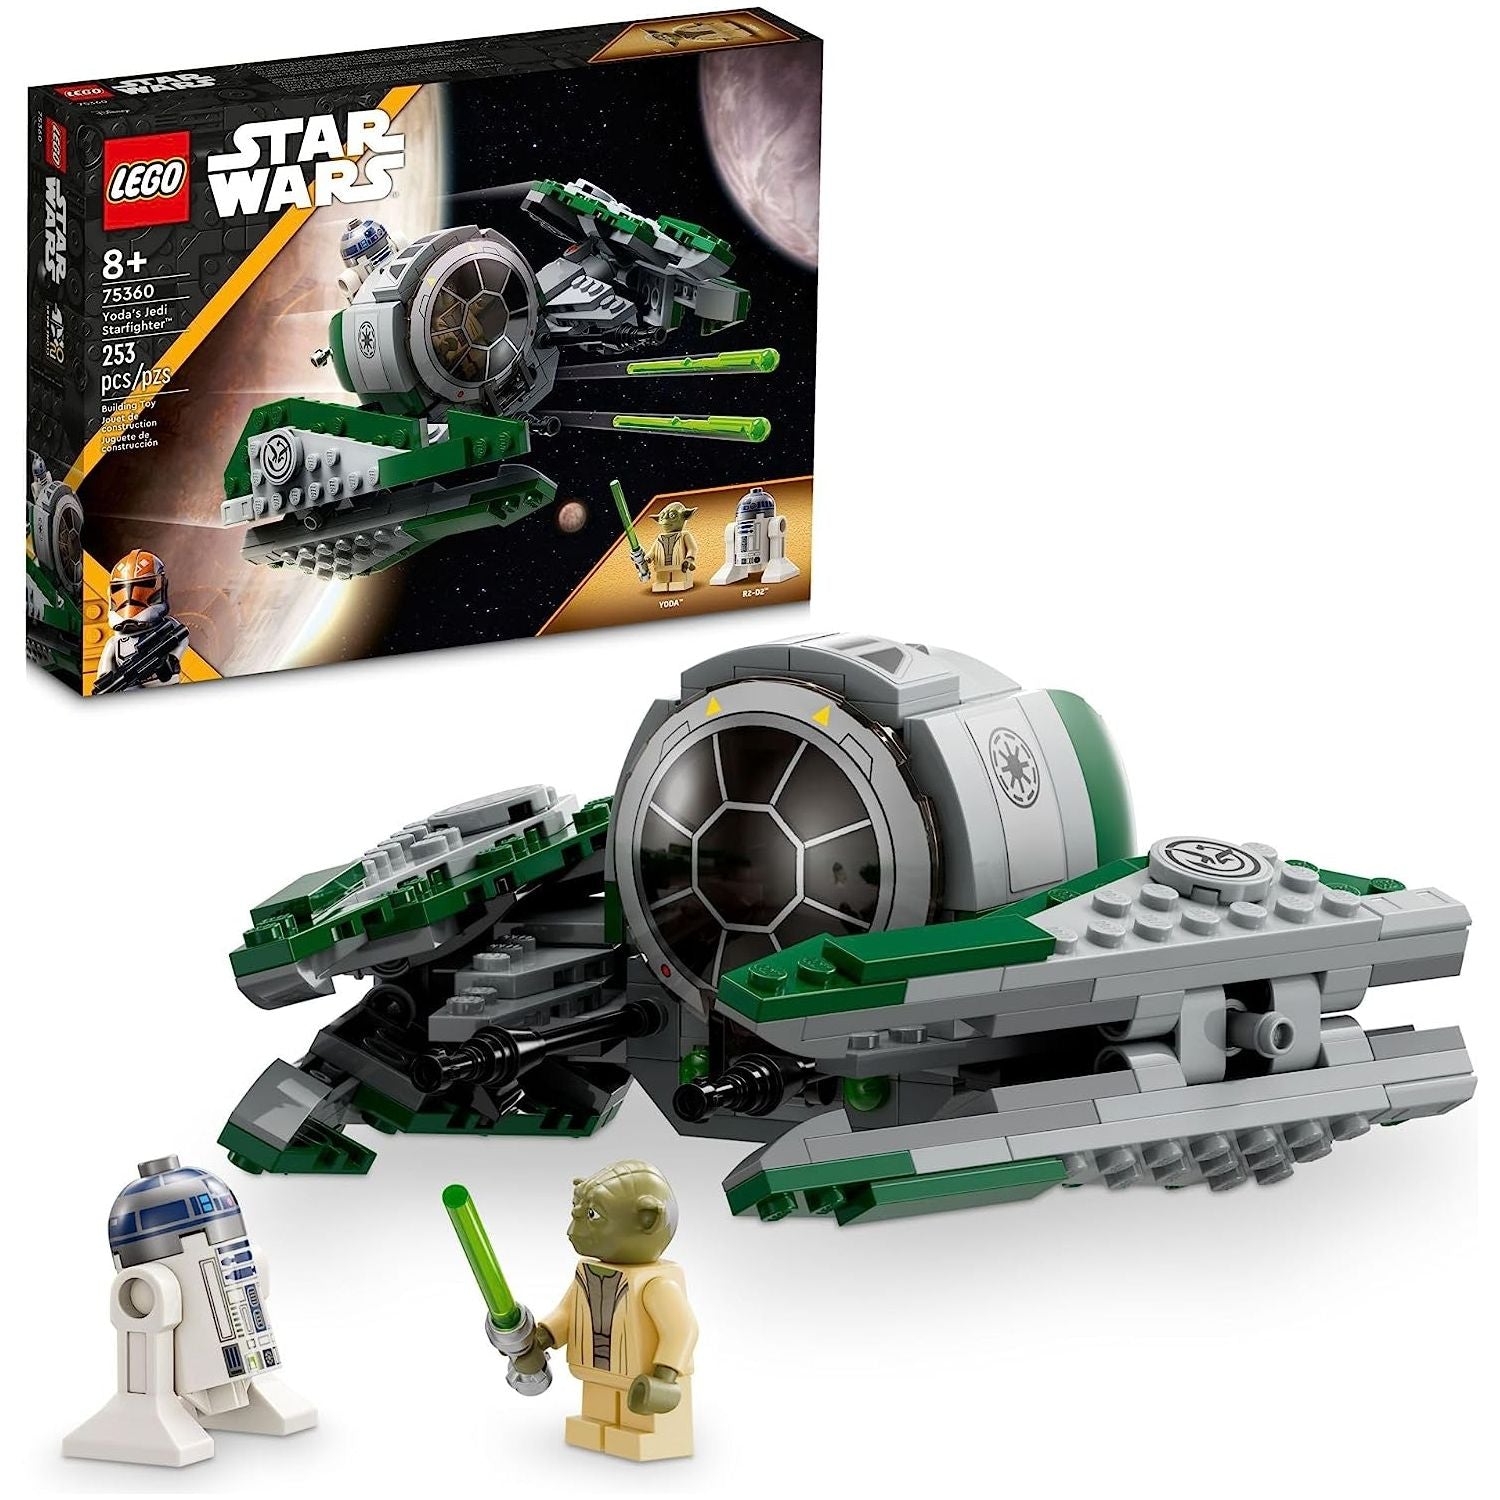 LEGO 75360  Star Wars The Clone Wars Yoda’s Jedi Starfighter Star Wars Collectible for Kids Featuring Master Yoda Figure with Lightsaber Toy